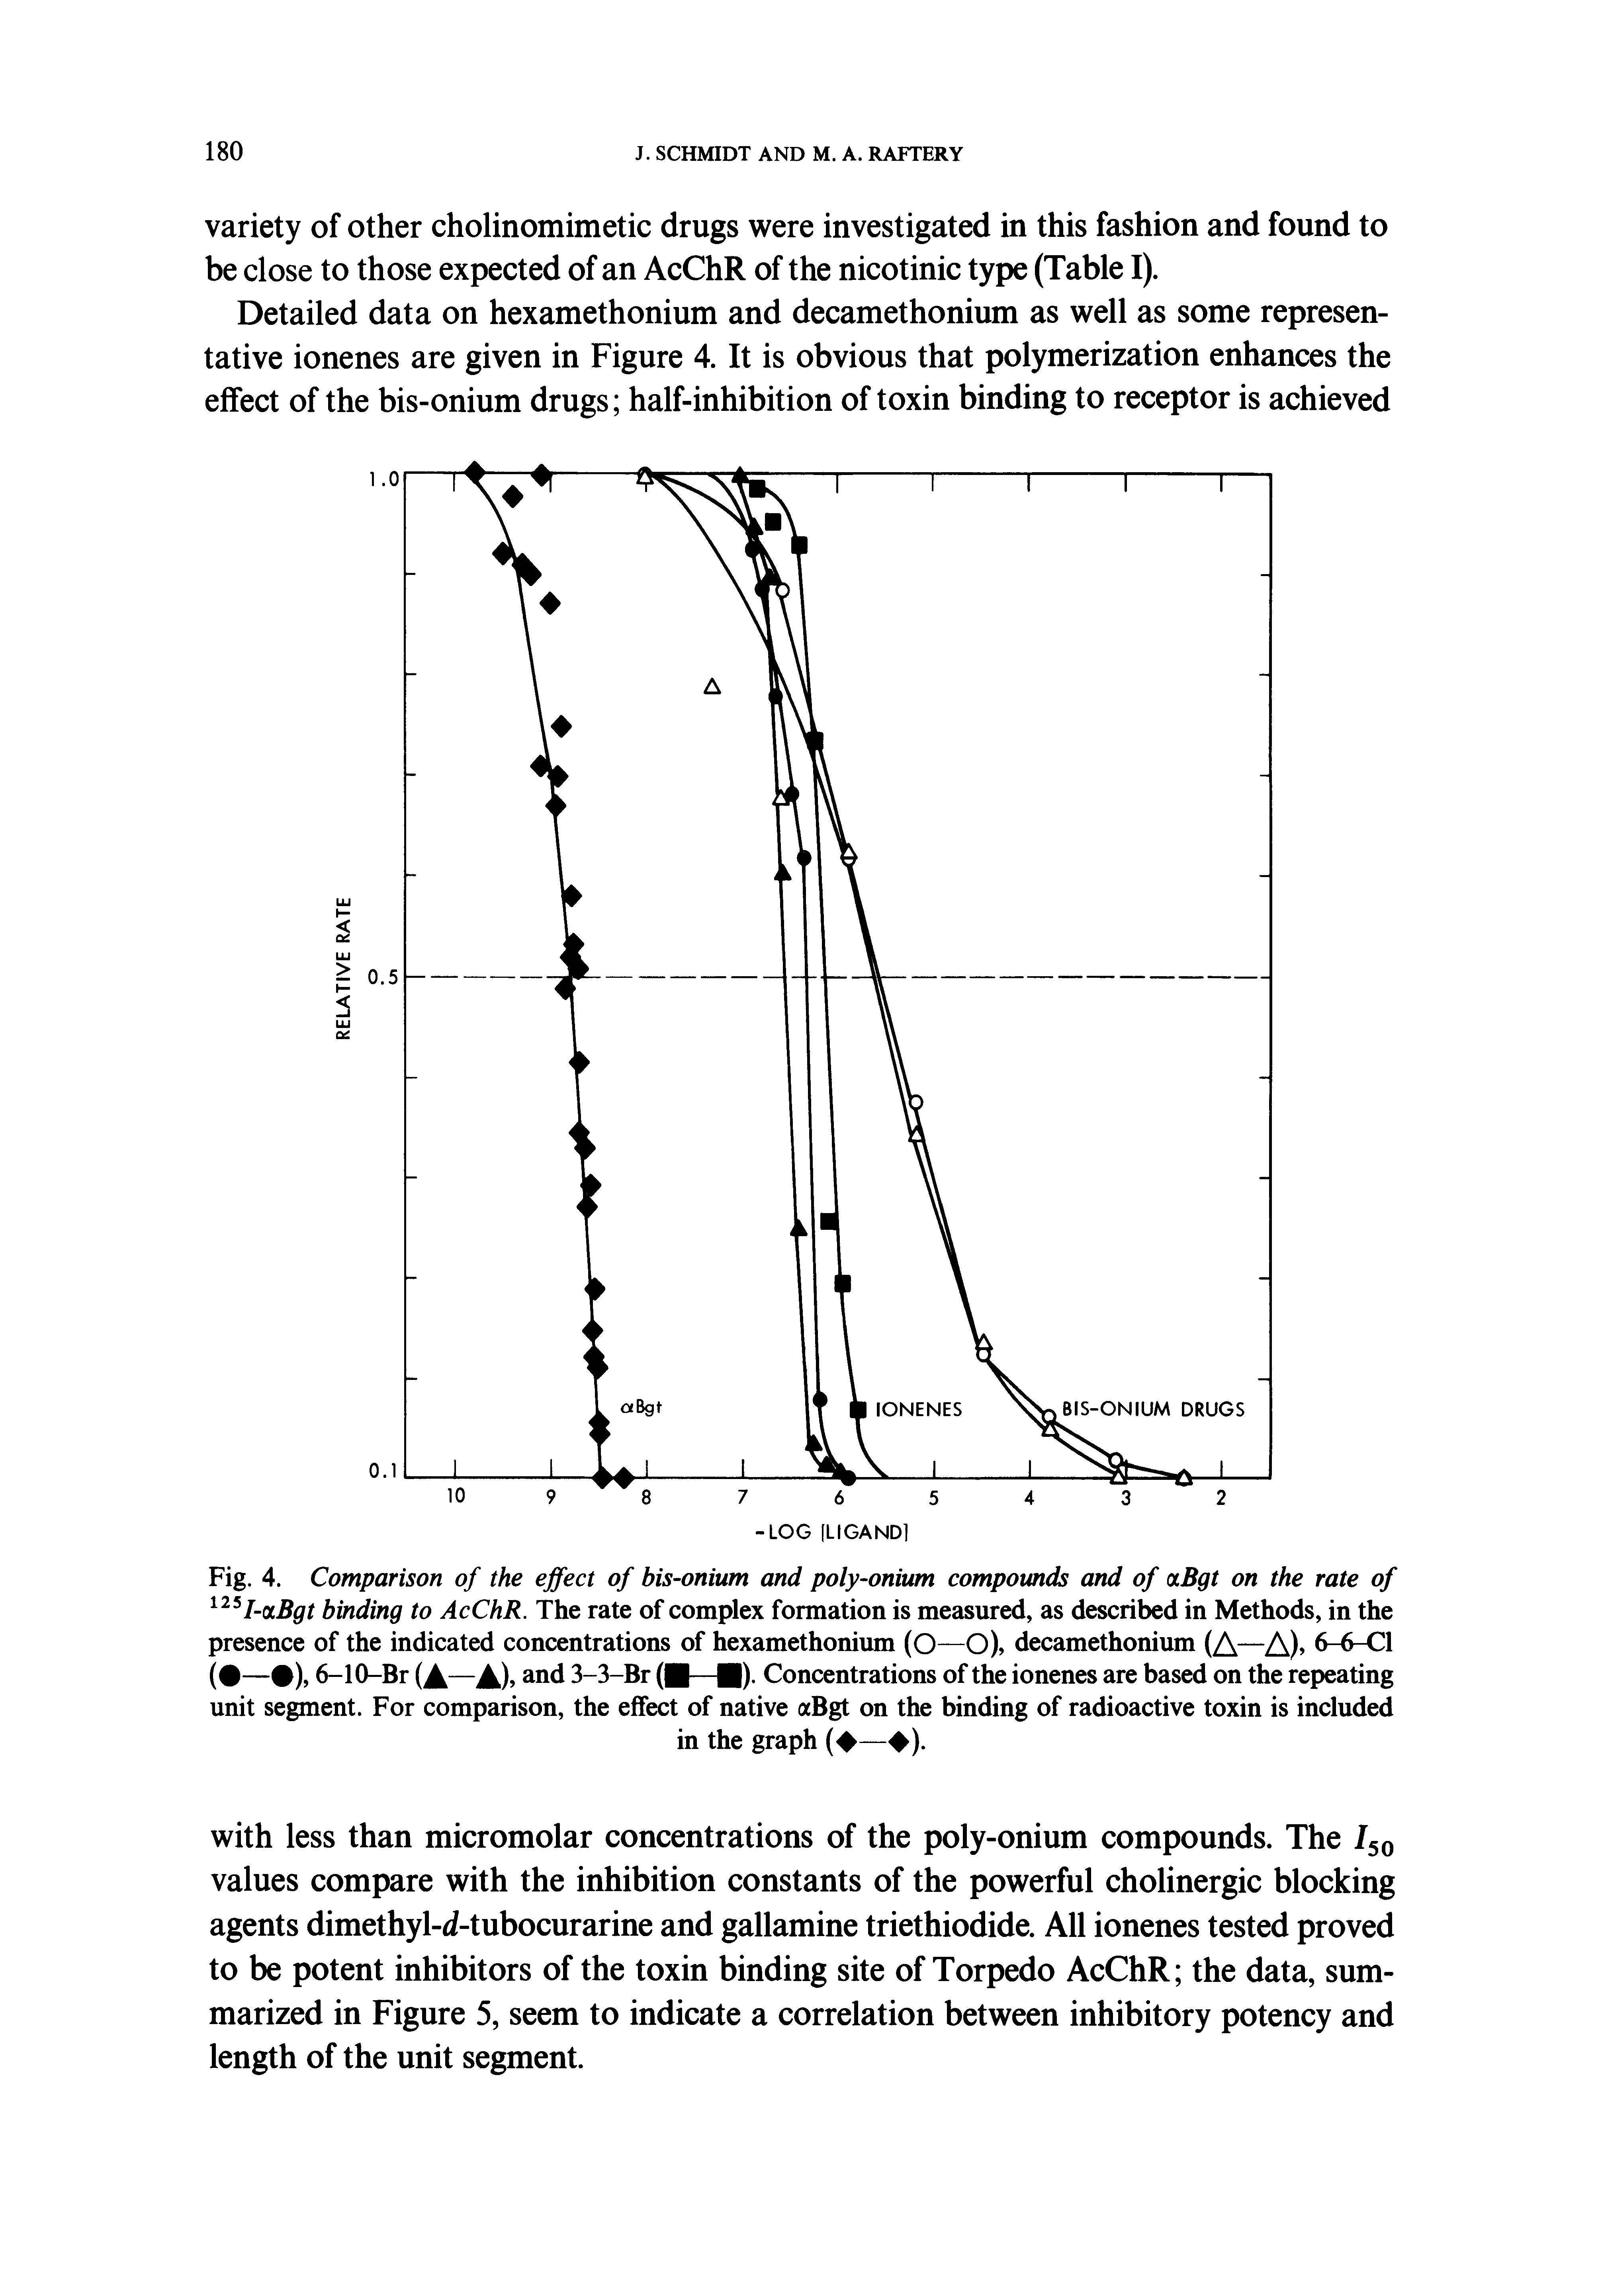 Fig. 4. Comparison of the effect of bis-onium and poly-onium compounds and of aBgt on the rate of I-<xBgt binding to AcChR. The rate of complex formation is measured, as described in Methods, in the presence of the indicated concentrations of hexamethonium (O—O), decamethonium (A—A) 6-6-Cl ( — ), 6-10-Br and 3-3-Br ( — ). Concentrations of the ionenes are based on the repeating...